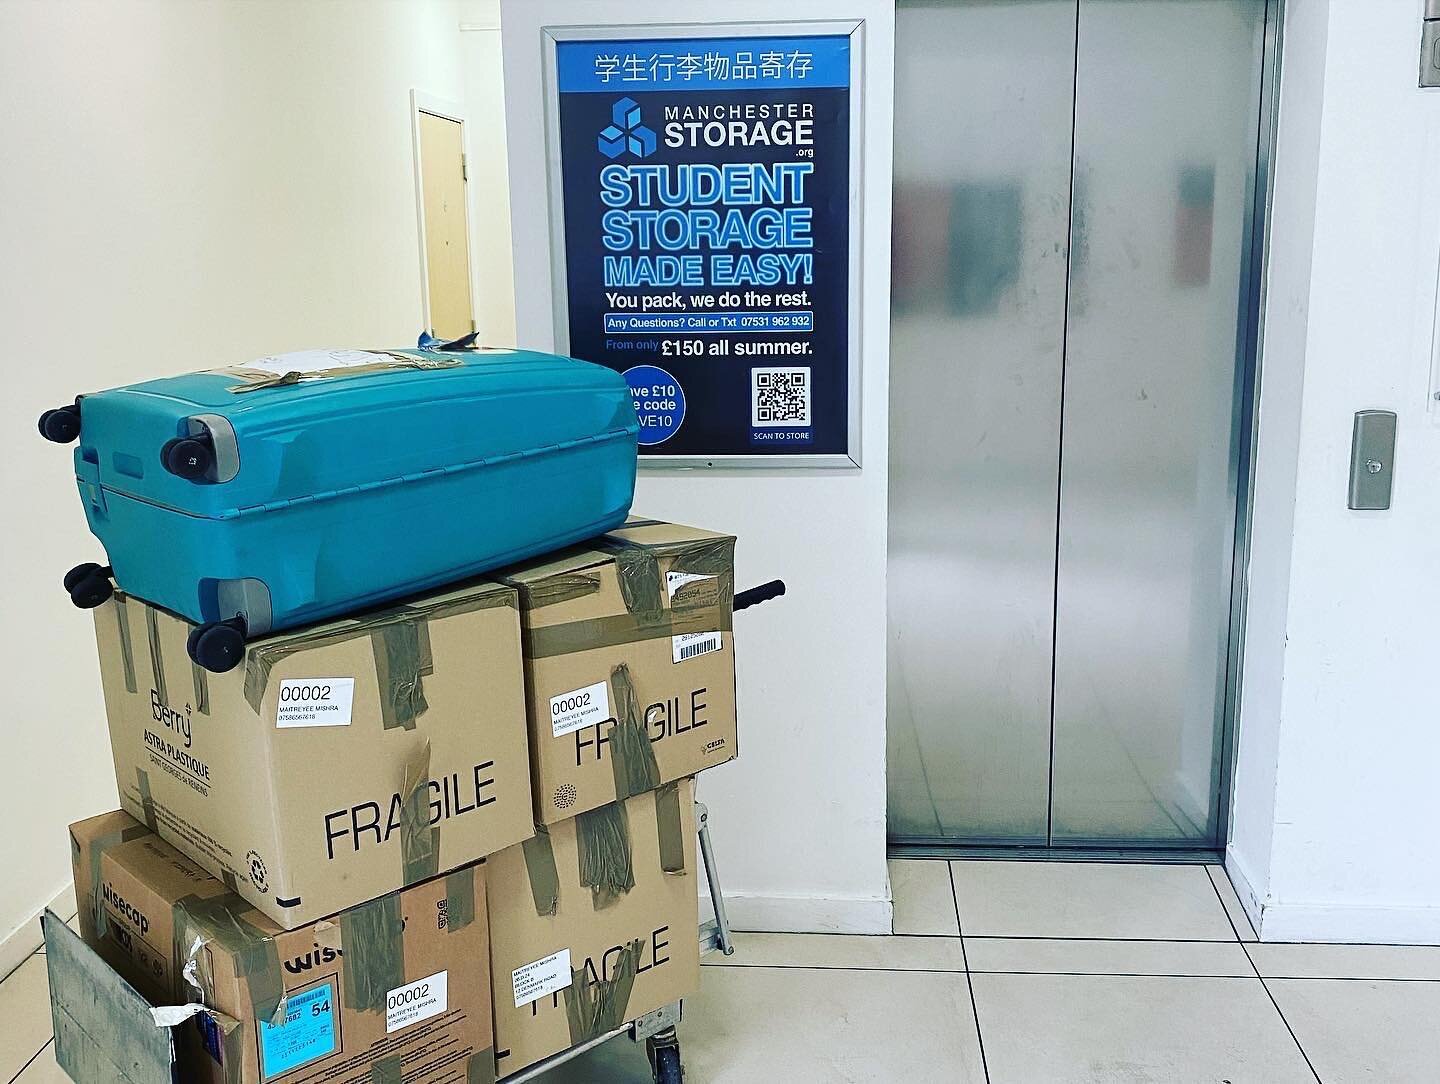 Student storage made easy. Call us today 07531 962 932. Serving Manchester, Leeds and Liverpool . Storage from &pound;160 all summer. You pack we do the rest. Empty boxes delivered. Collection and delivery included. #manchesteruniversities #salfordun